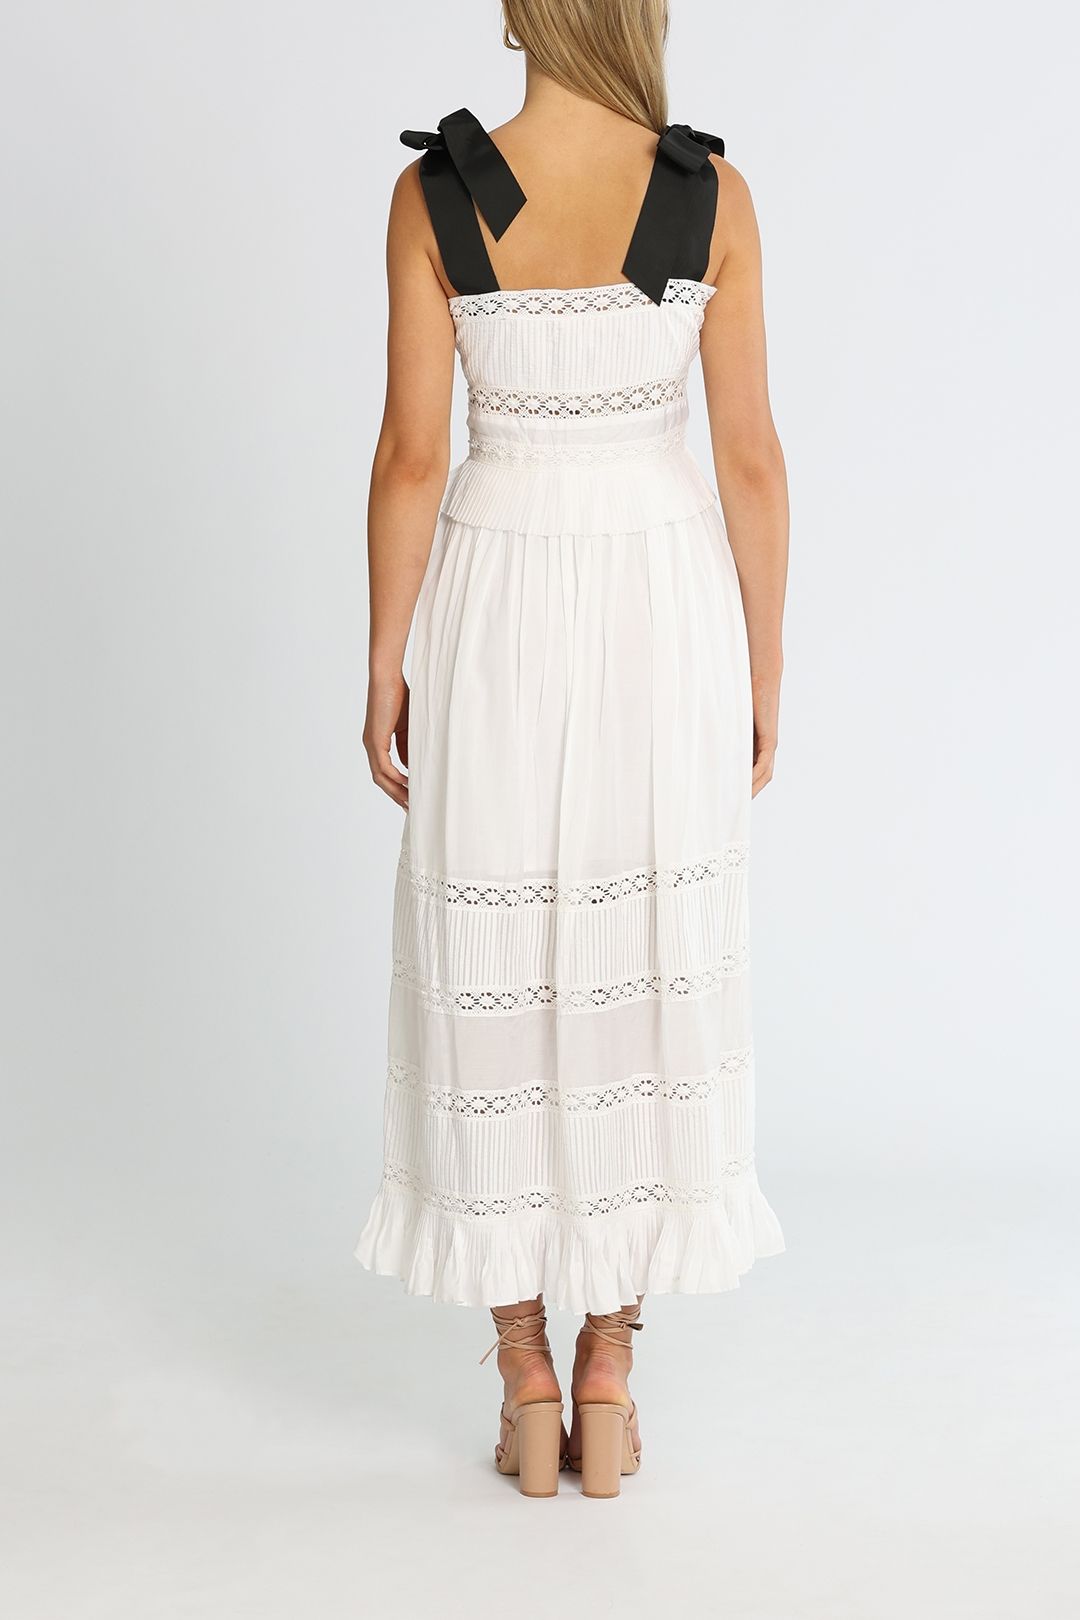 Ted Baker Promis Midi Dress With Grosgrain Straps White Lace